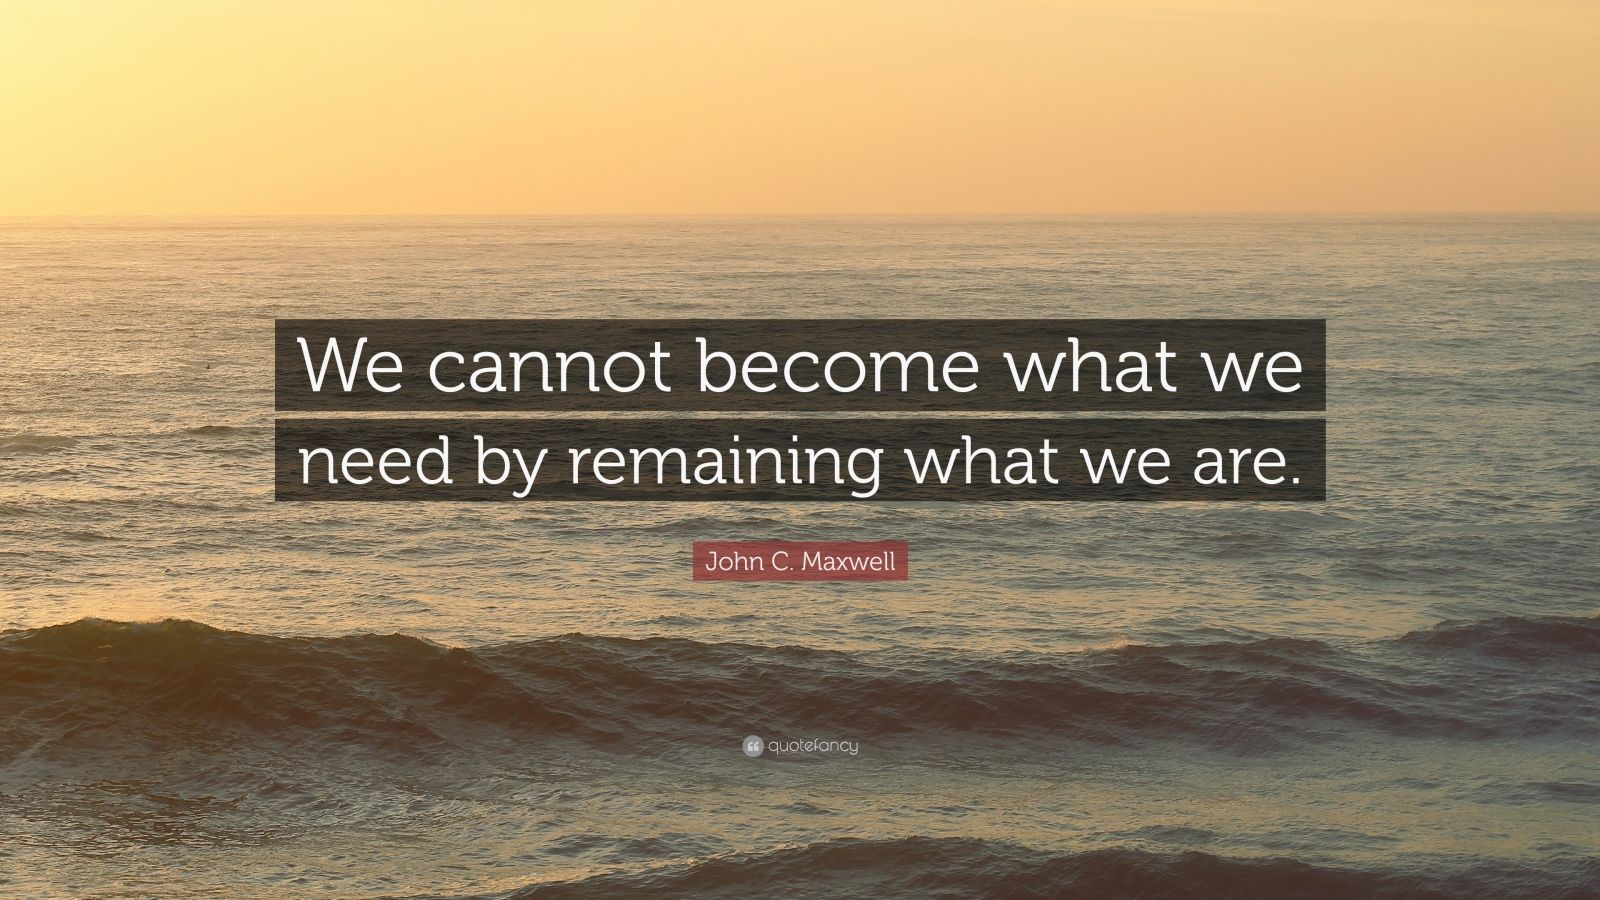 John C. Maxwell Quote “We cannot what we need by remaining what